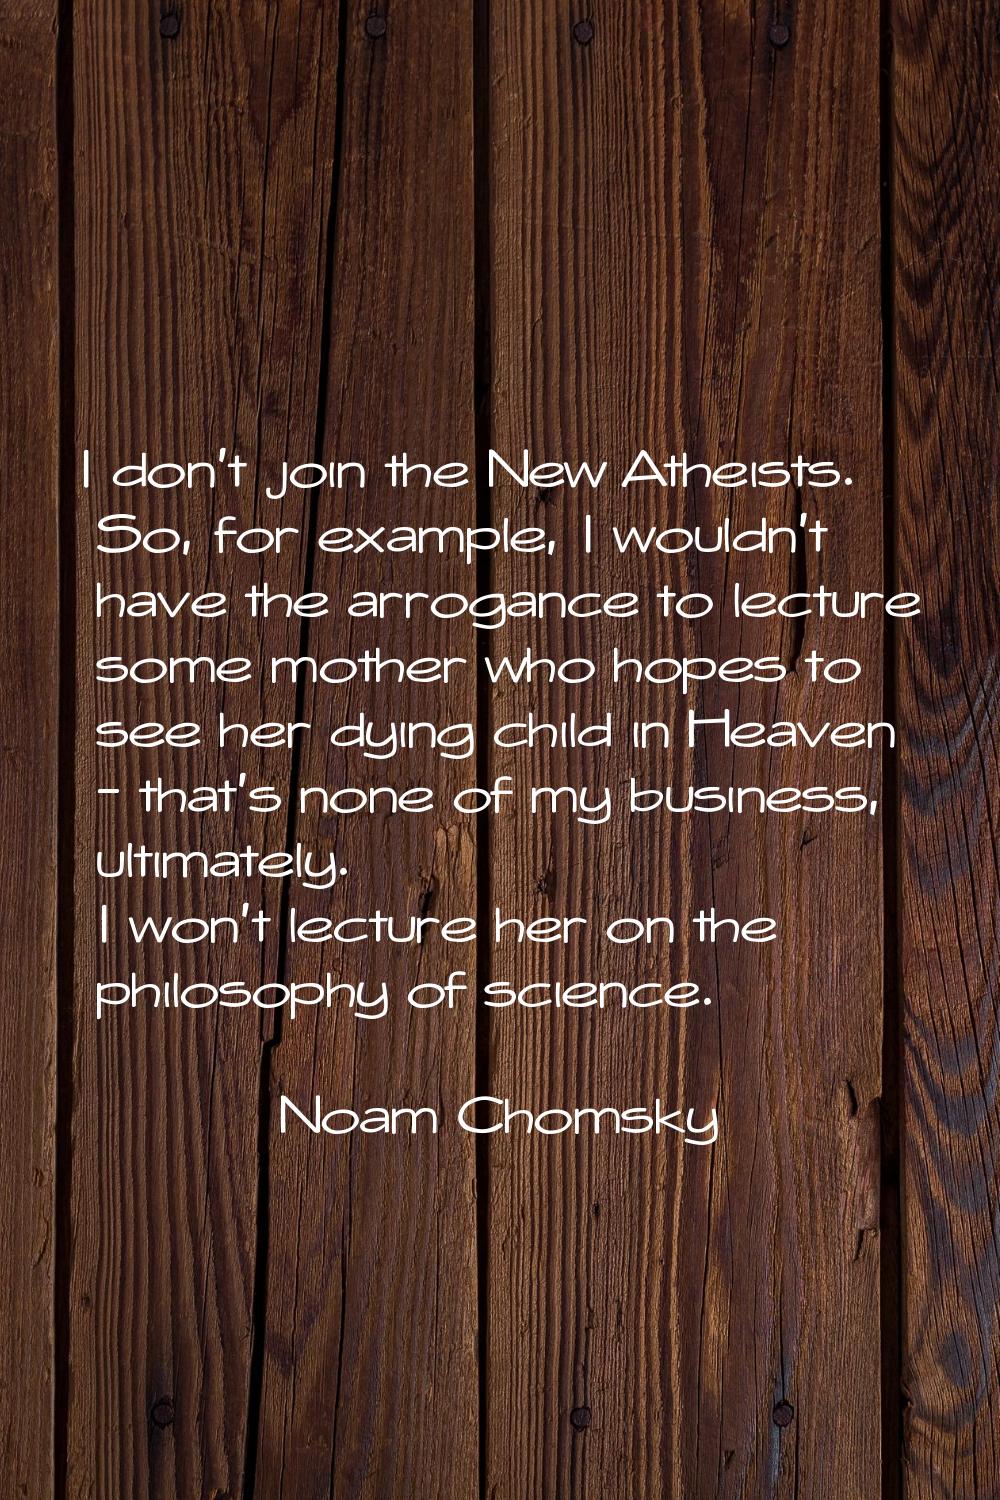 I don't join the New Atheists. So, for example, I wouldn't have the arrogance to lecture some mothe